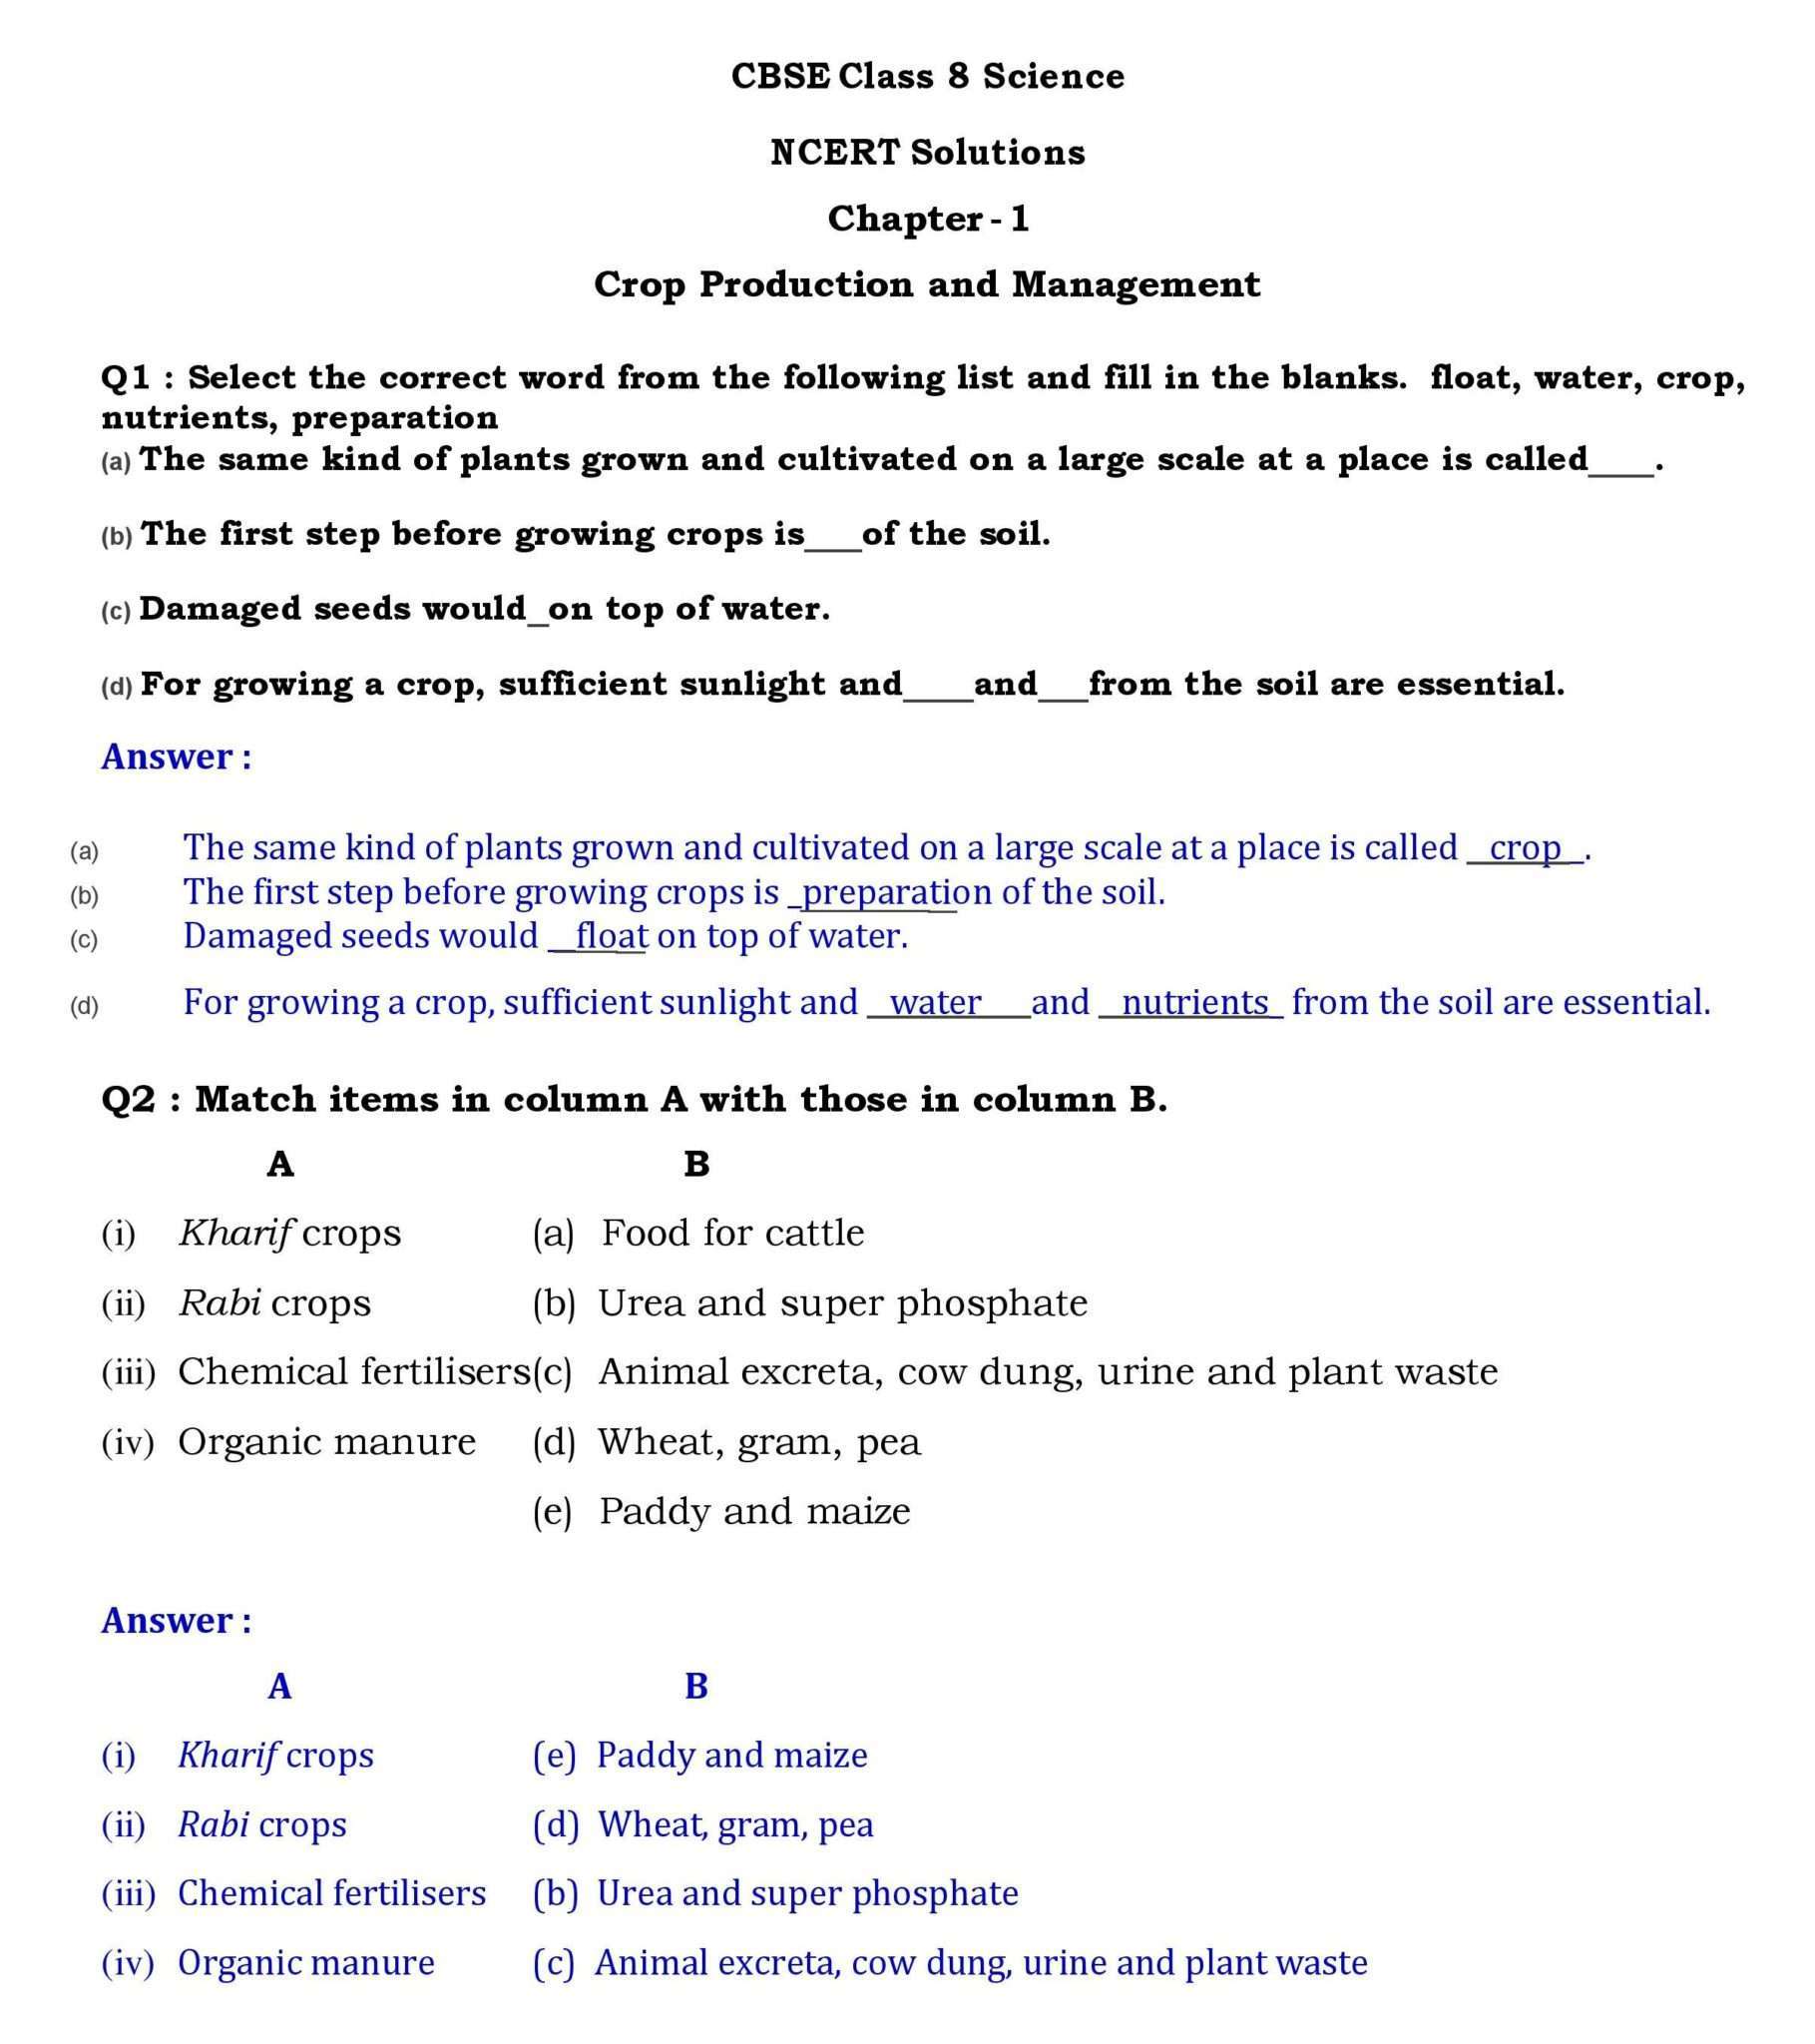 NCERT Solutions for Class 8 Science Chapter 1 page 001